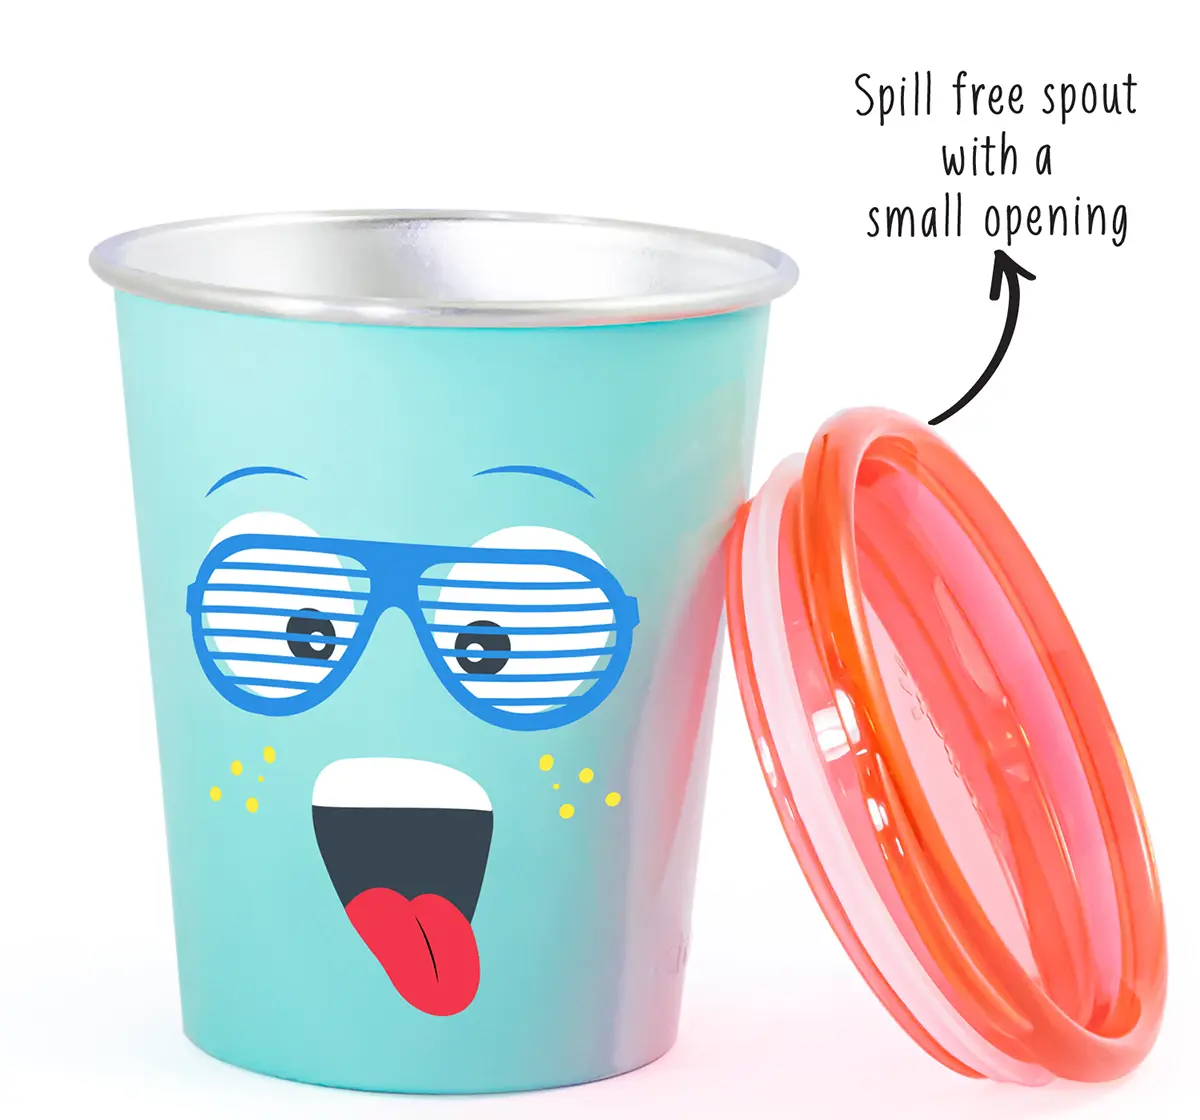 Rabitat Spill Free Stainless Steel Cup, Blue, Spunky, 5Y+